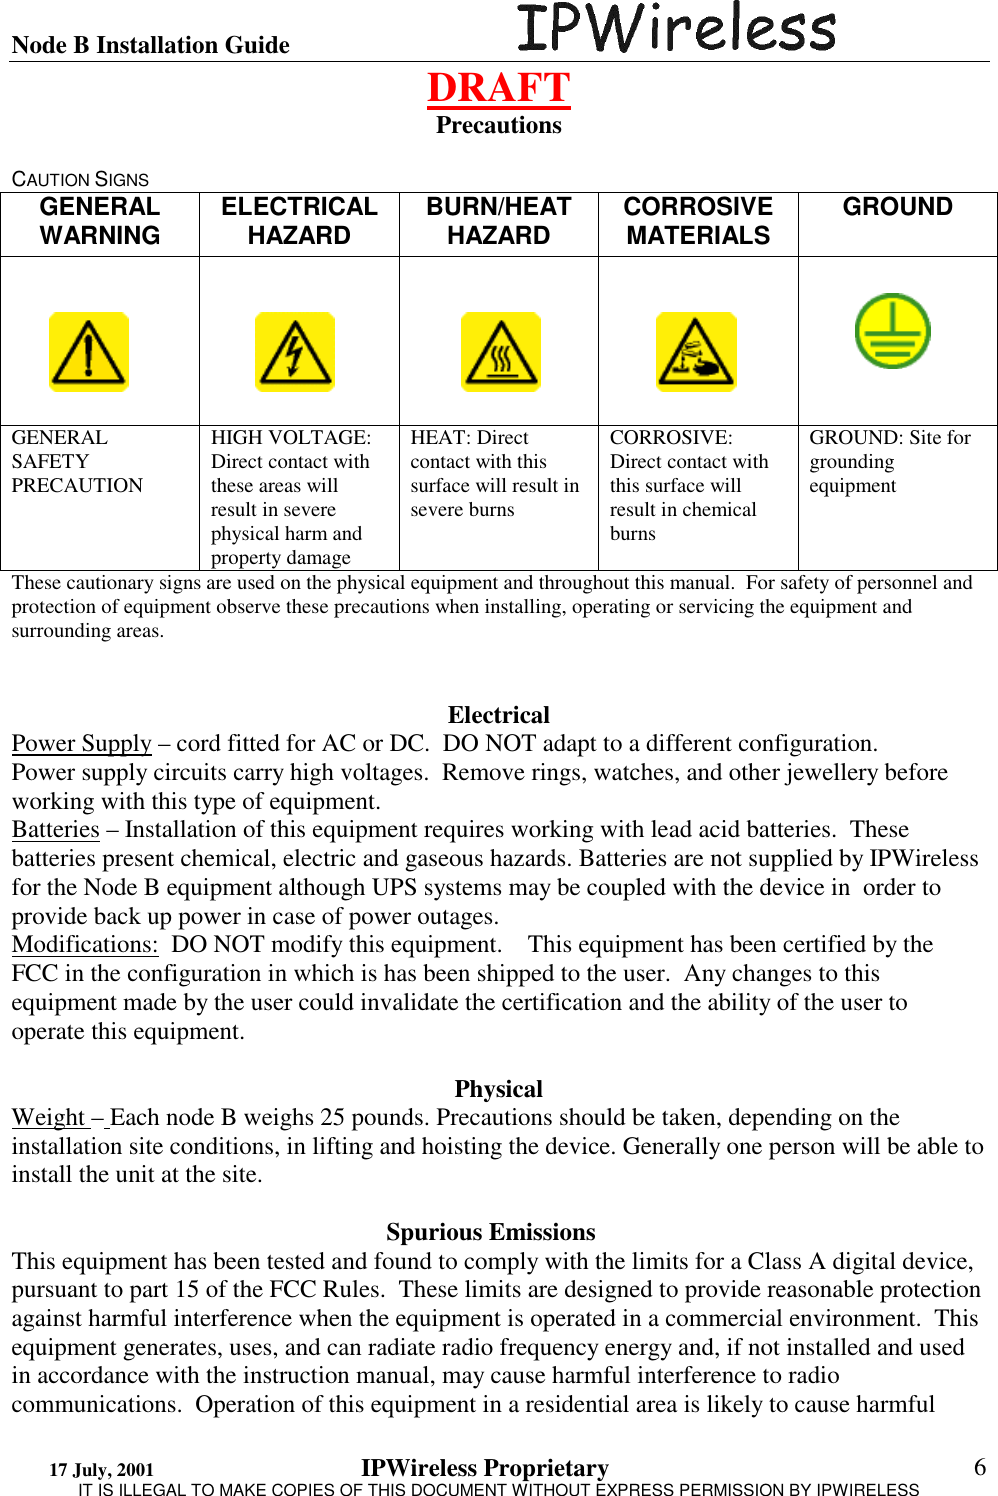 Node B Installation Guide                                      DRAFT 17 July, 2001                                 IPWireless Proprietary                                                  IT IS ILLEGAL TO MAKE COPIES OF THIS DOCUMENT WITHOUT EXPRESS PERMISSION BY IPWIRELESS  6 Precautions   CAUTION SIGNS  GENERAL WARNING  ELECTRICAL HAZARD  BURN/HEAT HAZARD  CORROSIVE MATERIALS  GROUND      GENERAL SAFETY PRECAUTION  HIGH VOLTAGE: Direct contact with these areas will result in severe physical harm and property damage HEAT: Direct contact with this surface will result in severe burns CORROSIVE: Direct contact with this surface will result in chemical burns GROUND: Site for grounding equipment These cautionary signs are used on the physical equipment and throughout this manual.  For safety of personnel and protection of equipment observe these precautions when installing, operating or servicing the equipment and surrounding areas.    Electrical Power Supply – cord fitted for AC or DC.  DO NOT adapt to a different configuration. Power supply circuits carry high voltages.  Remove rings, watches, and other jewellery before working with this type of equipment. Batteries – Installation of this equipment requires working with lead acid batteries.  These batteries present chemical, electric and gaseous hazards. Batteries are not supplied by IPWireless for the Node B equipment although UPS systems may be coupled with the device in  order to provide back up power in case of power outages. Modifications:  DO NOT modify this equipment.    This equipment has been certified by the FCC in the configuration in which is has been shipped to the user.  Any changes to this equipment made by the user could invalidate the certification and the ability of the user to operate this equipment.  Physical Weight – Each node B weighs 25 pounds. Precautions should be taken, depending on the installation site conditions, in lifting and hoisting the device. Generally one person will be able to install the unit at the site.       Spurious Emissions    This equipment has been tested and found to comply with the limits for a Class A digital device, pursuant to part 15 of the FCC Rules.  These limits are designed to provide reasonable protection against harmful interference when the equipment is operated in a commercial environment.  This equipment generates, uses, and can radiate radio frequency energy and, if not installed and used in accordance with the instruction manual, may cause harmful interference to radio communications.  Operation of this equipment in a residential area is likely to cause harmful 